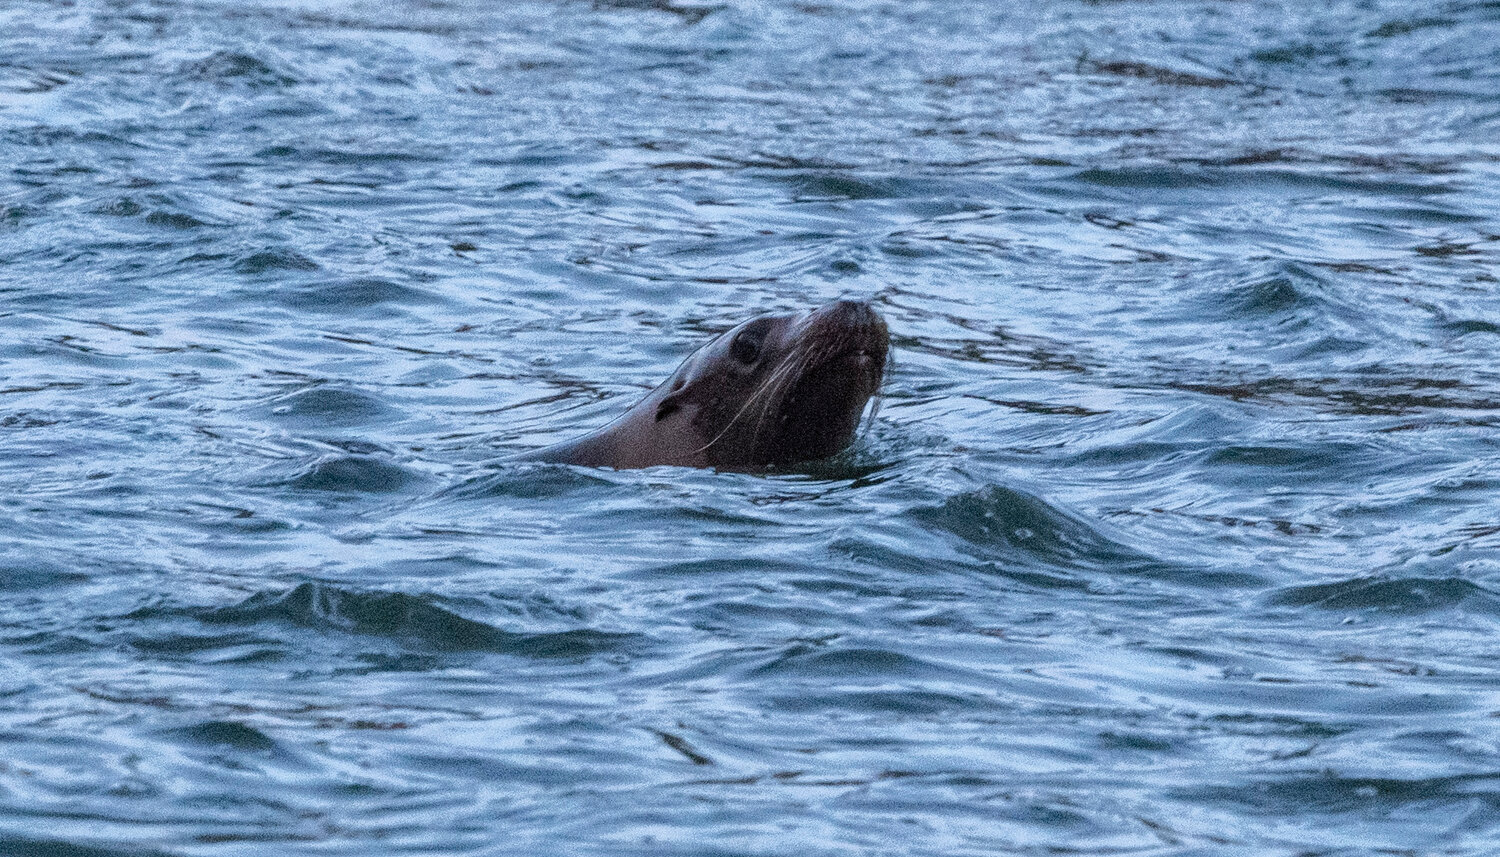 A sea lion sticks its head above the water near the Barrier Dam Monday night.